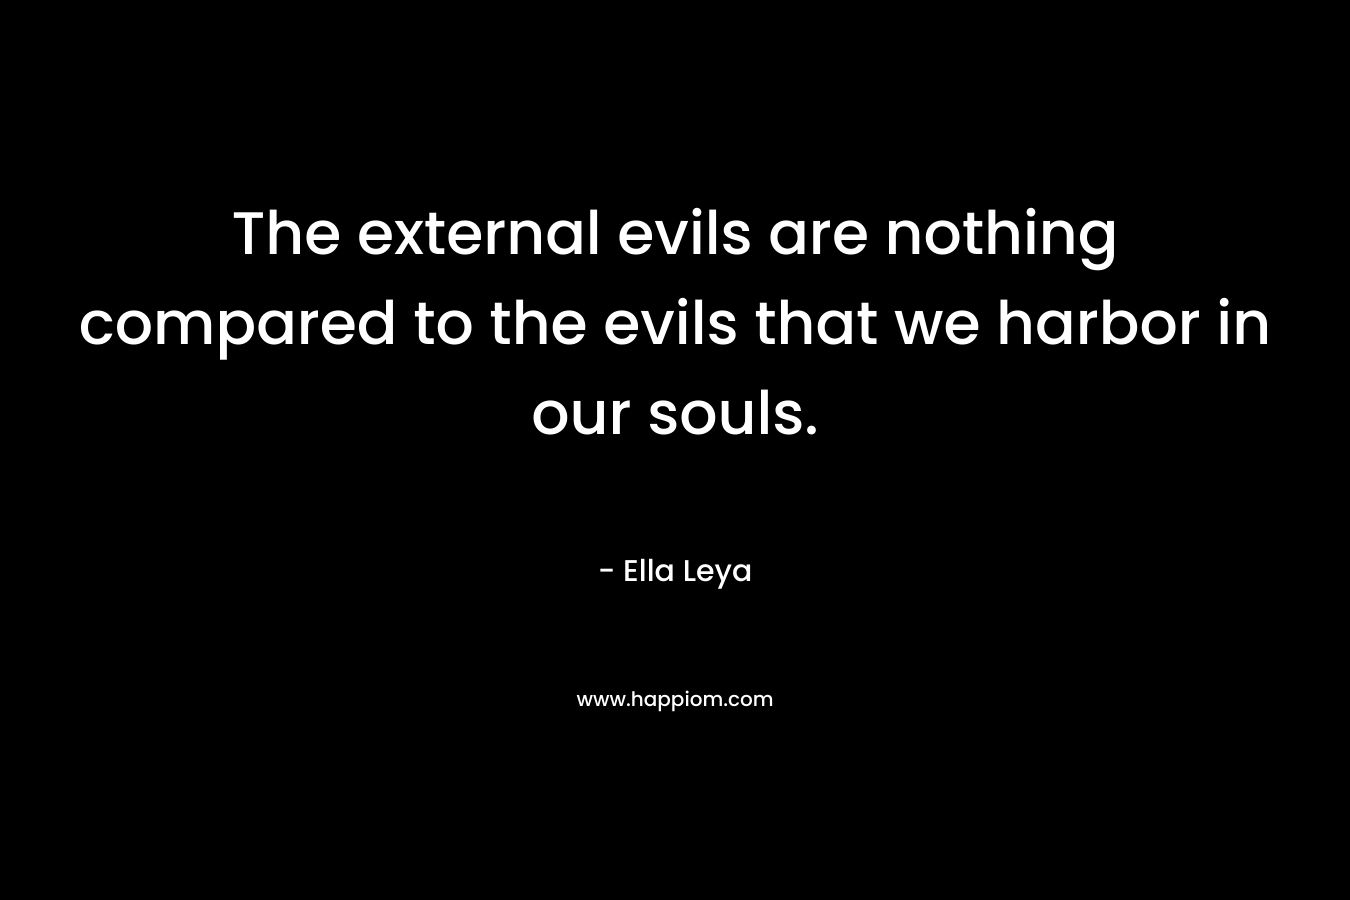 The external evils are nothing compared to the evils that we harbor in our souls.